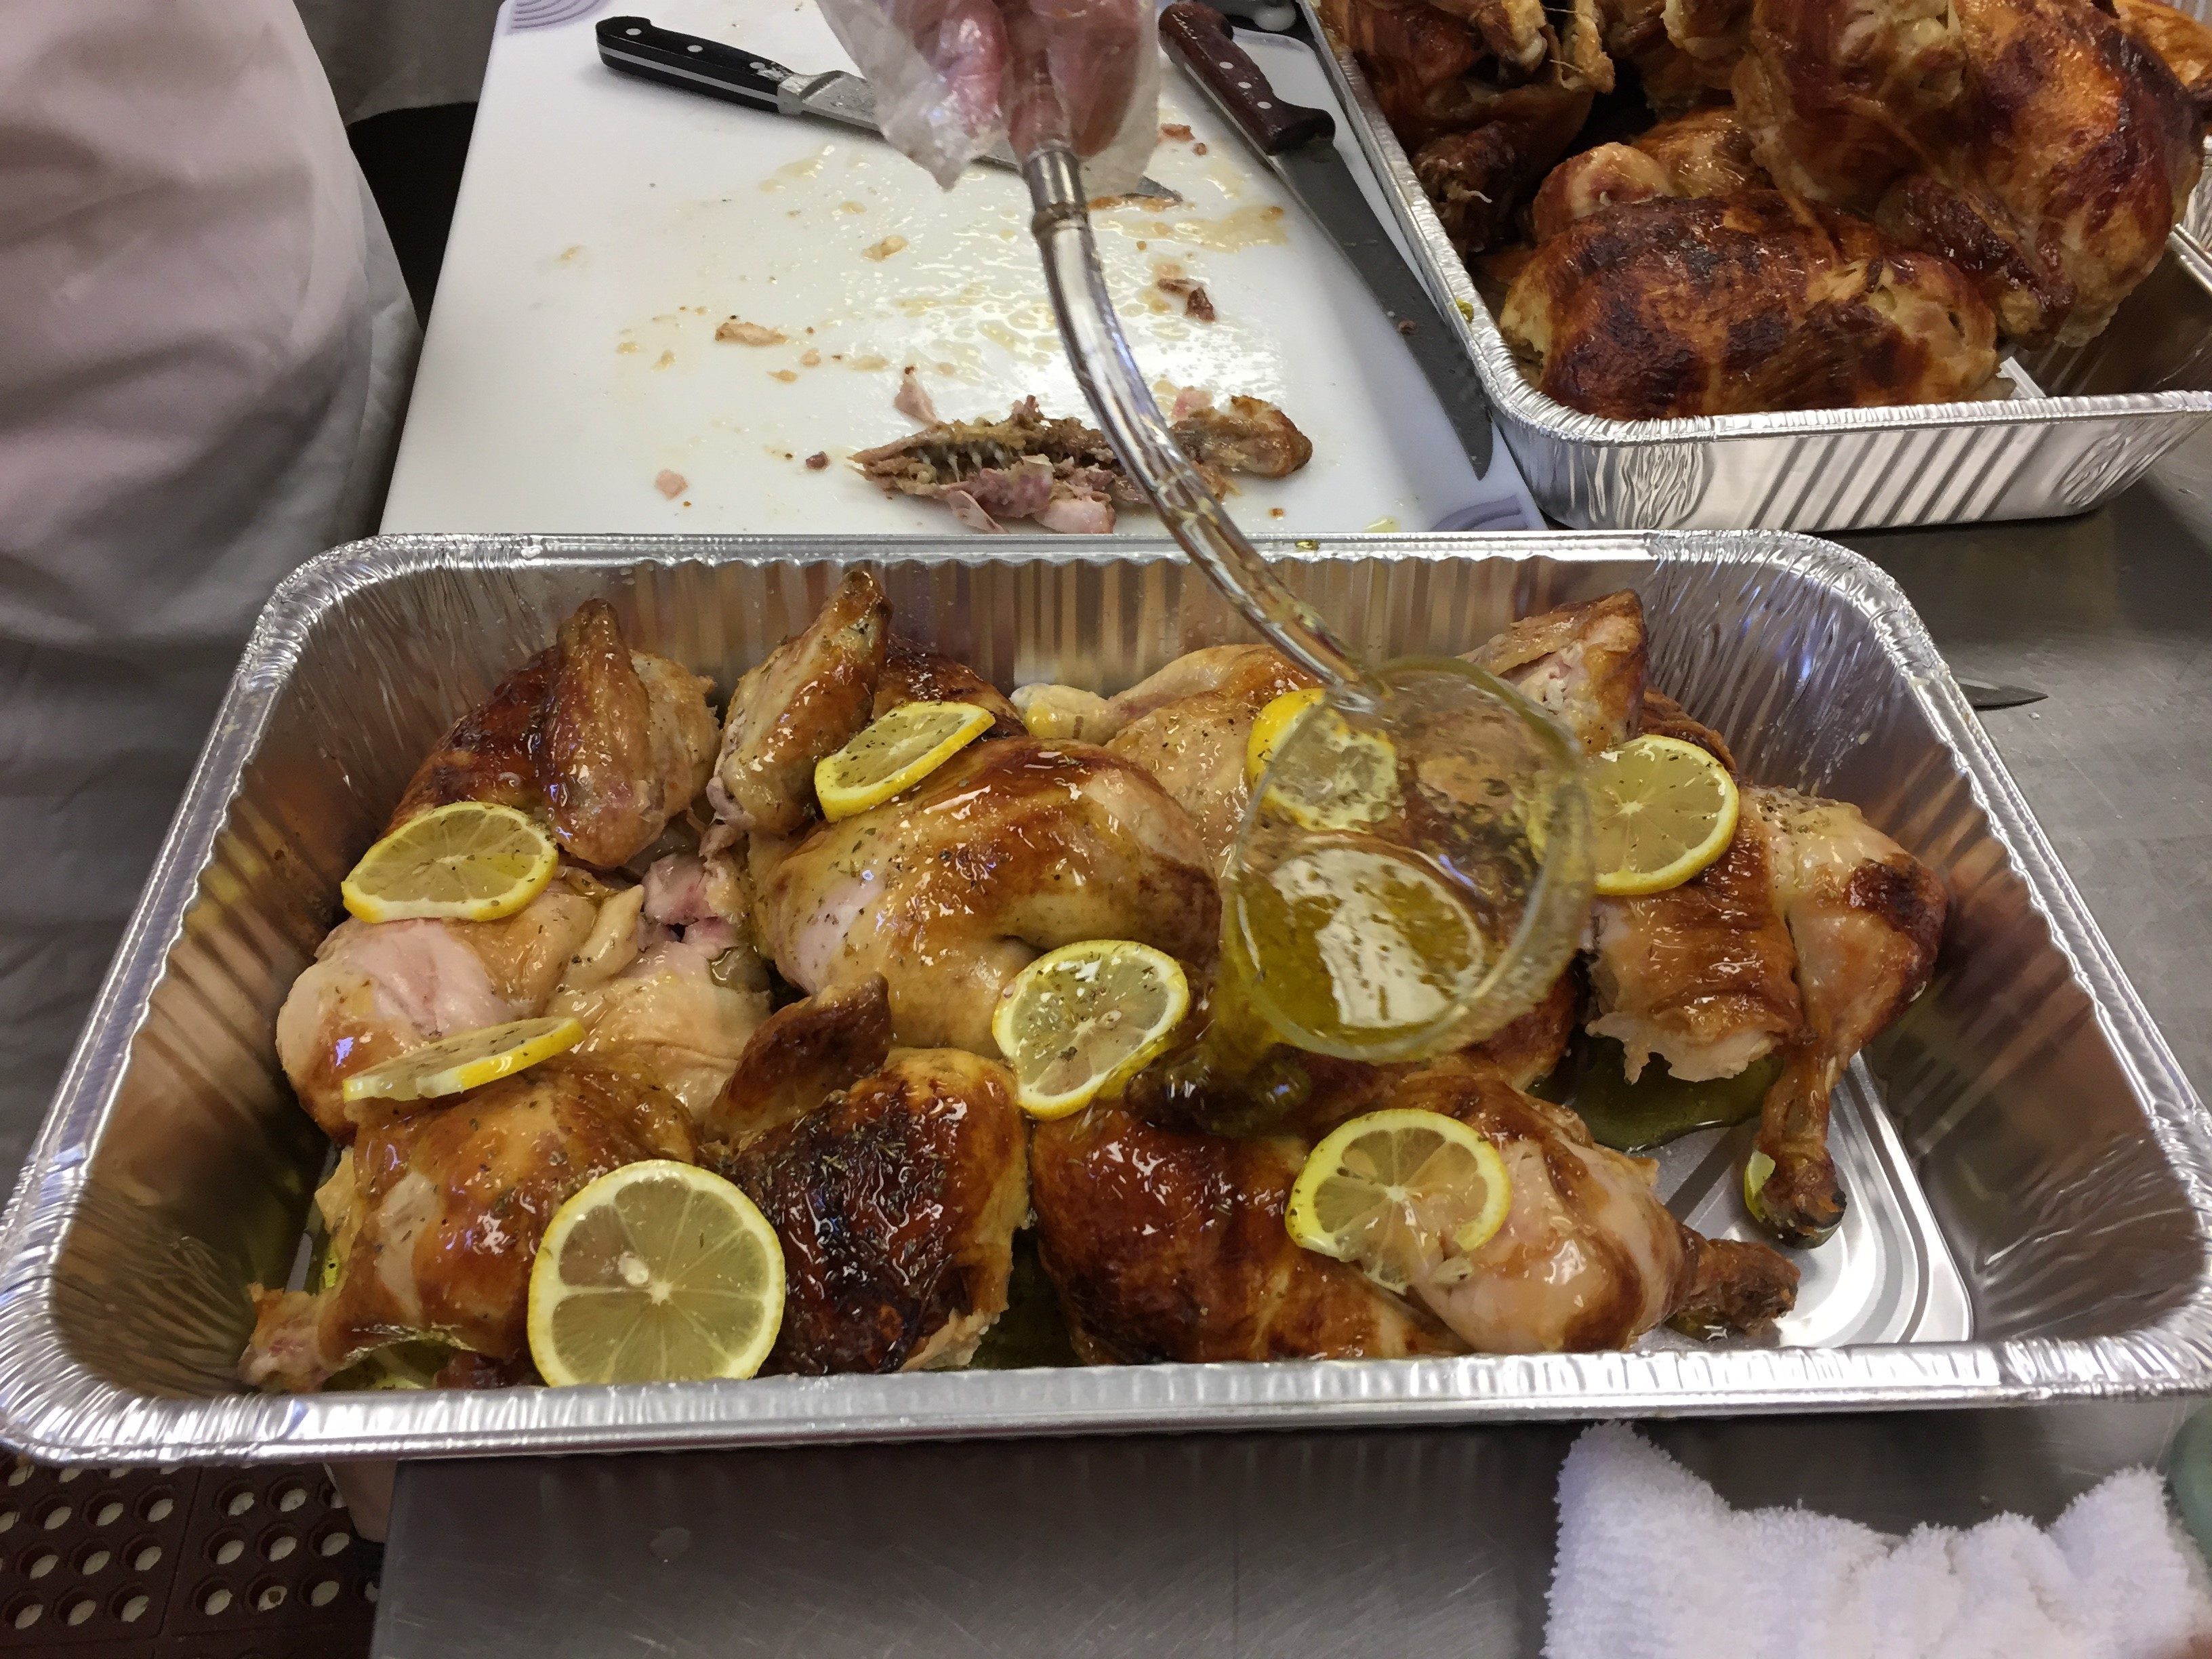 Chickens are basted in olive oil, lemon juice and spices for the popular Greek chicken dinners. (Carol Griskavich/PBS Wisconsin)